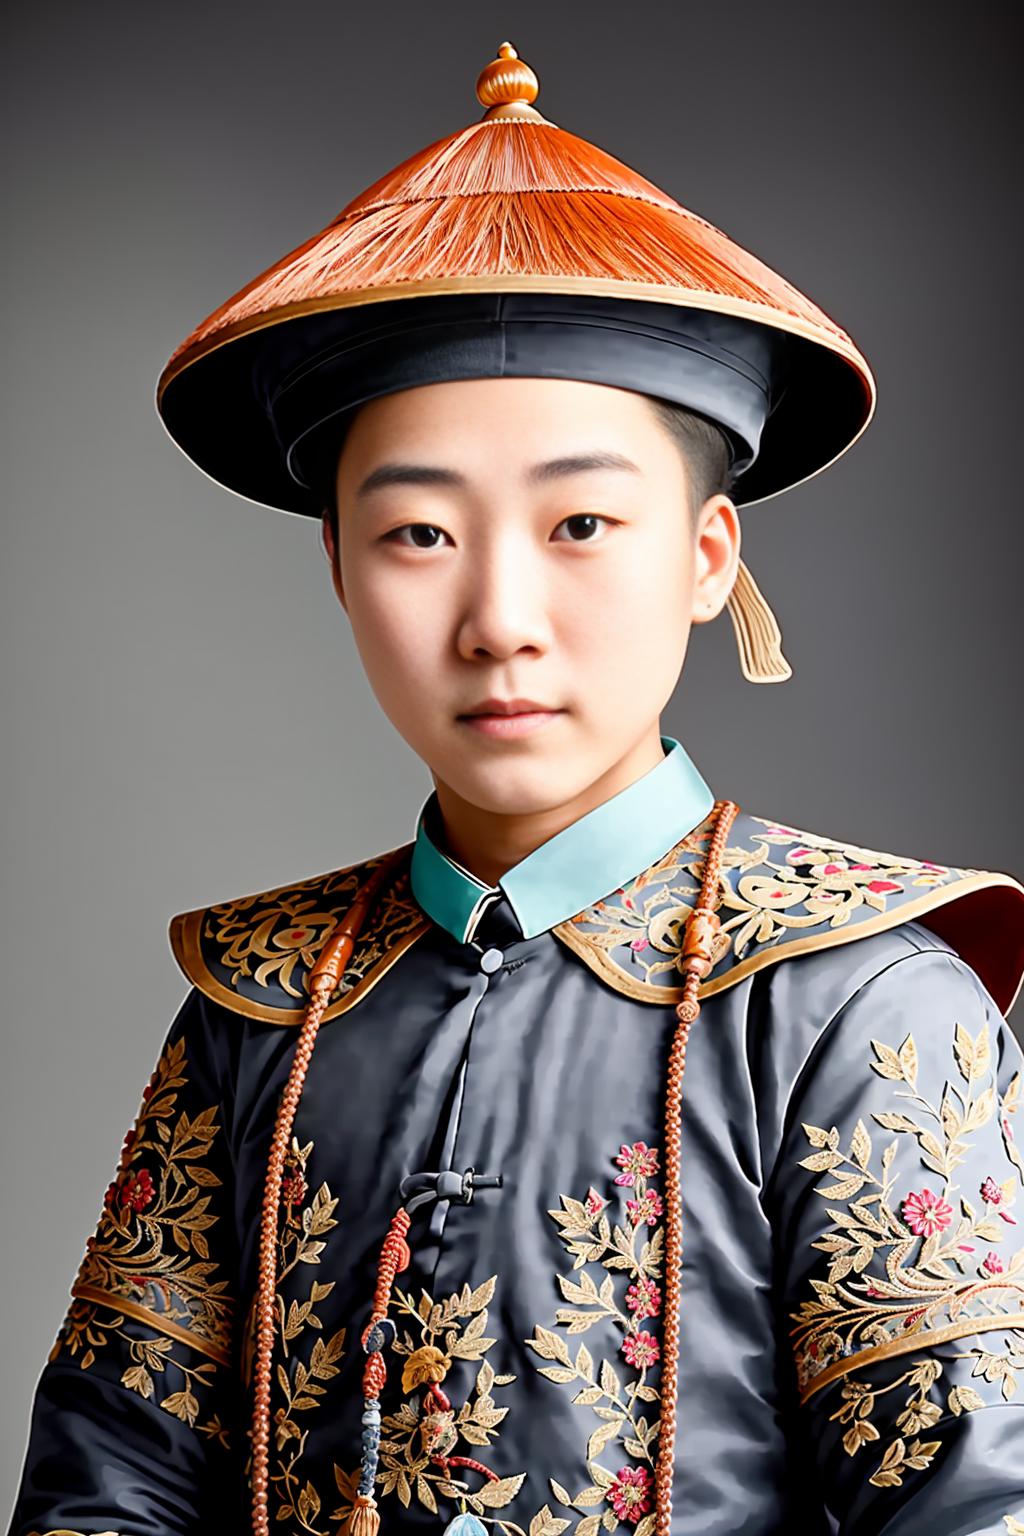 Qing Dynasty official headwear chinese  image by allpleoleo439